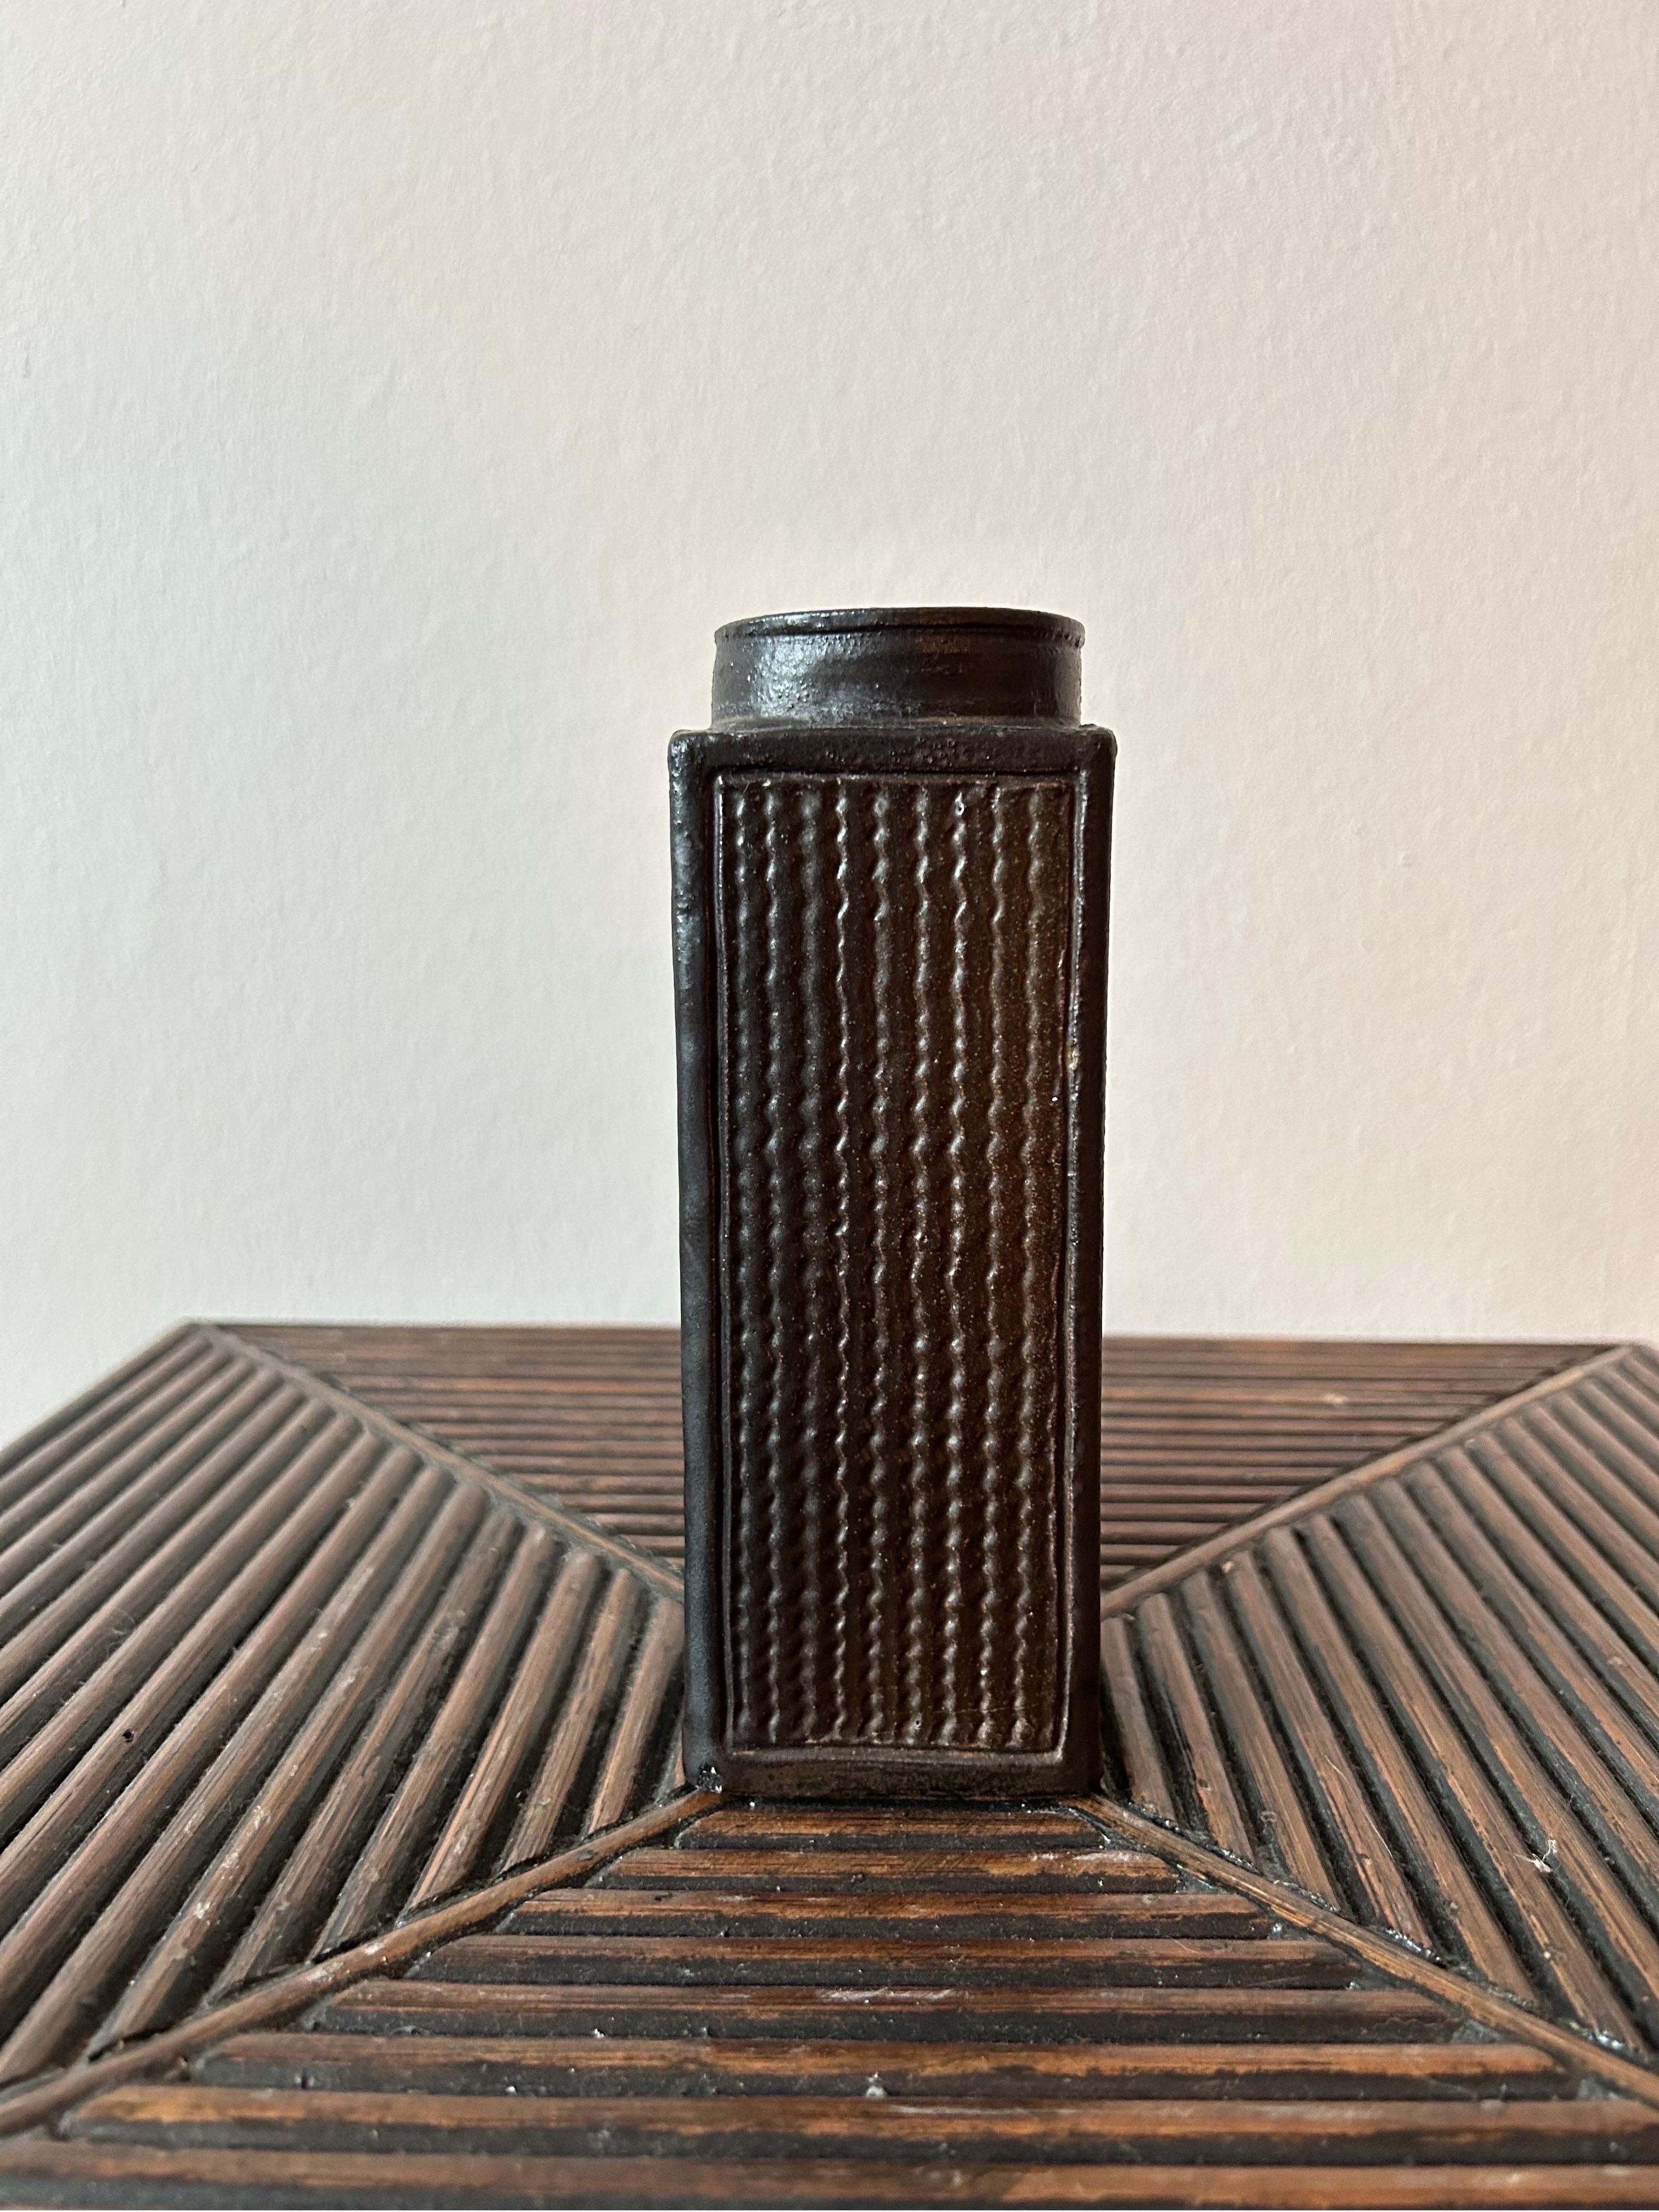 Rare square vase designed by Nils Kähler and made at the Kähler workshop in the 1950s in a dark brown and reddish glaze.

Kähler Keramik is a Danish ceramic company, originally from Næstved.
Kähler's ceramics started with the production of tiled